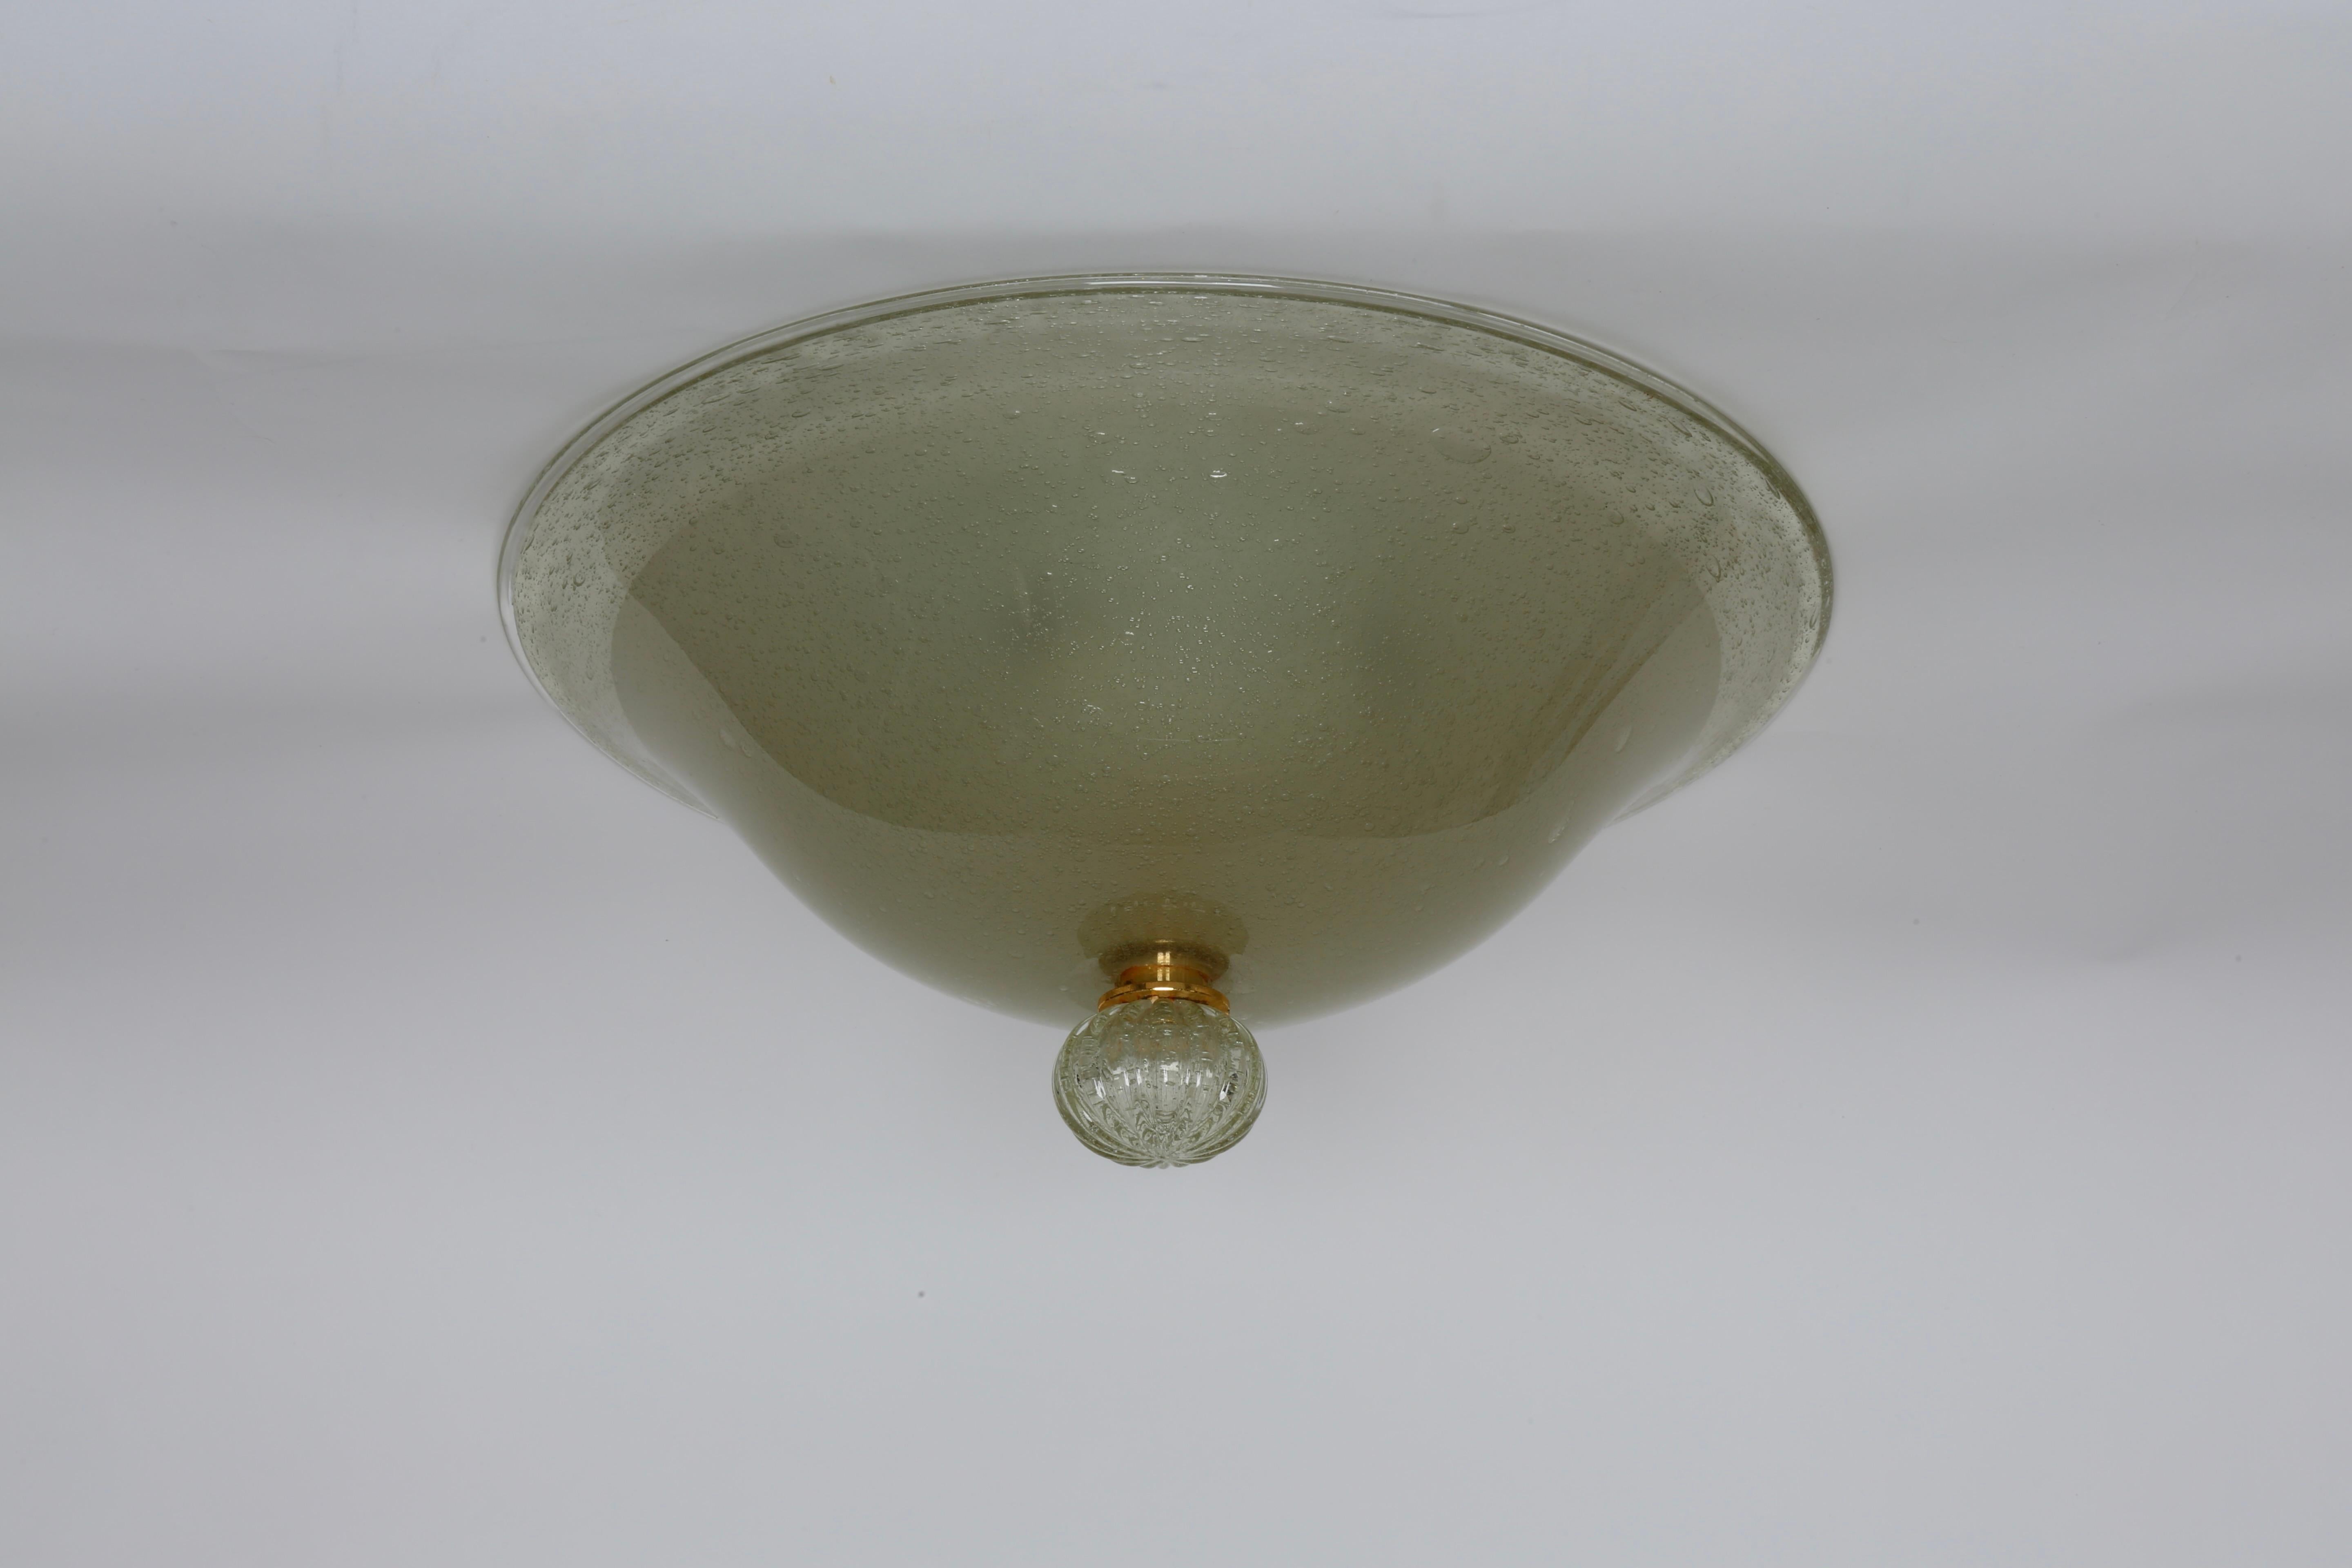 Murano Flush Mount Ceiling Light by Barovier & Toso, large For Sale 1